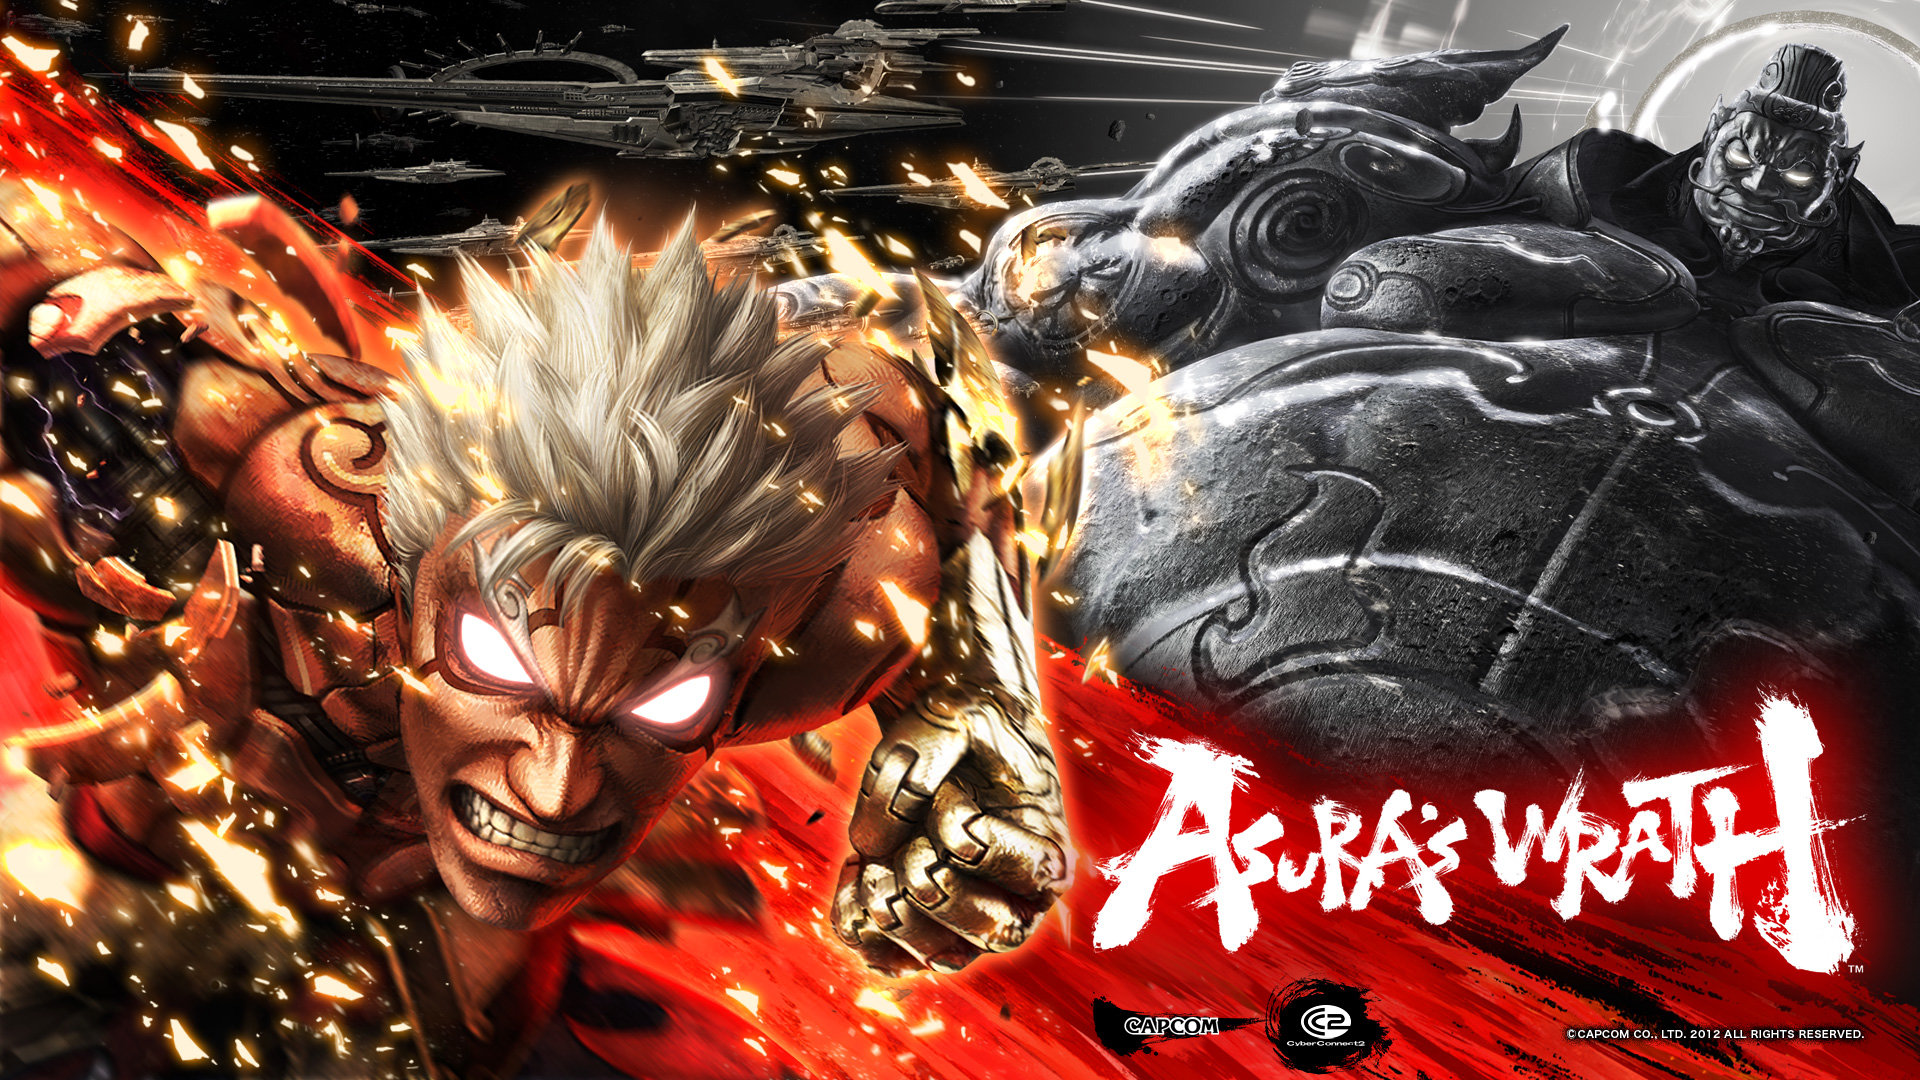 Download hd 1080p Asura's Wrath desktop background ID:6944 for free